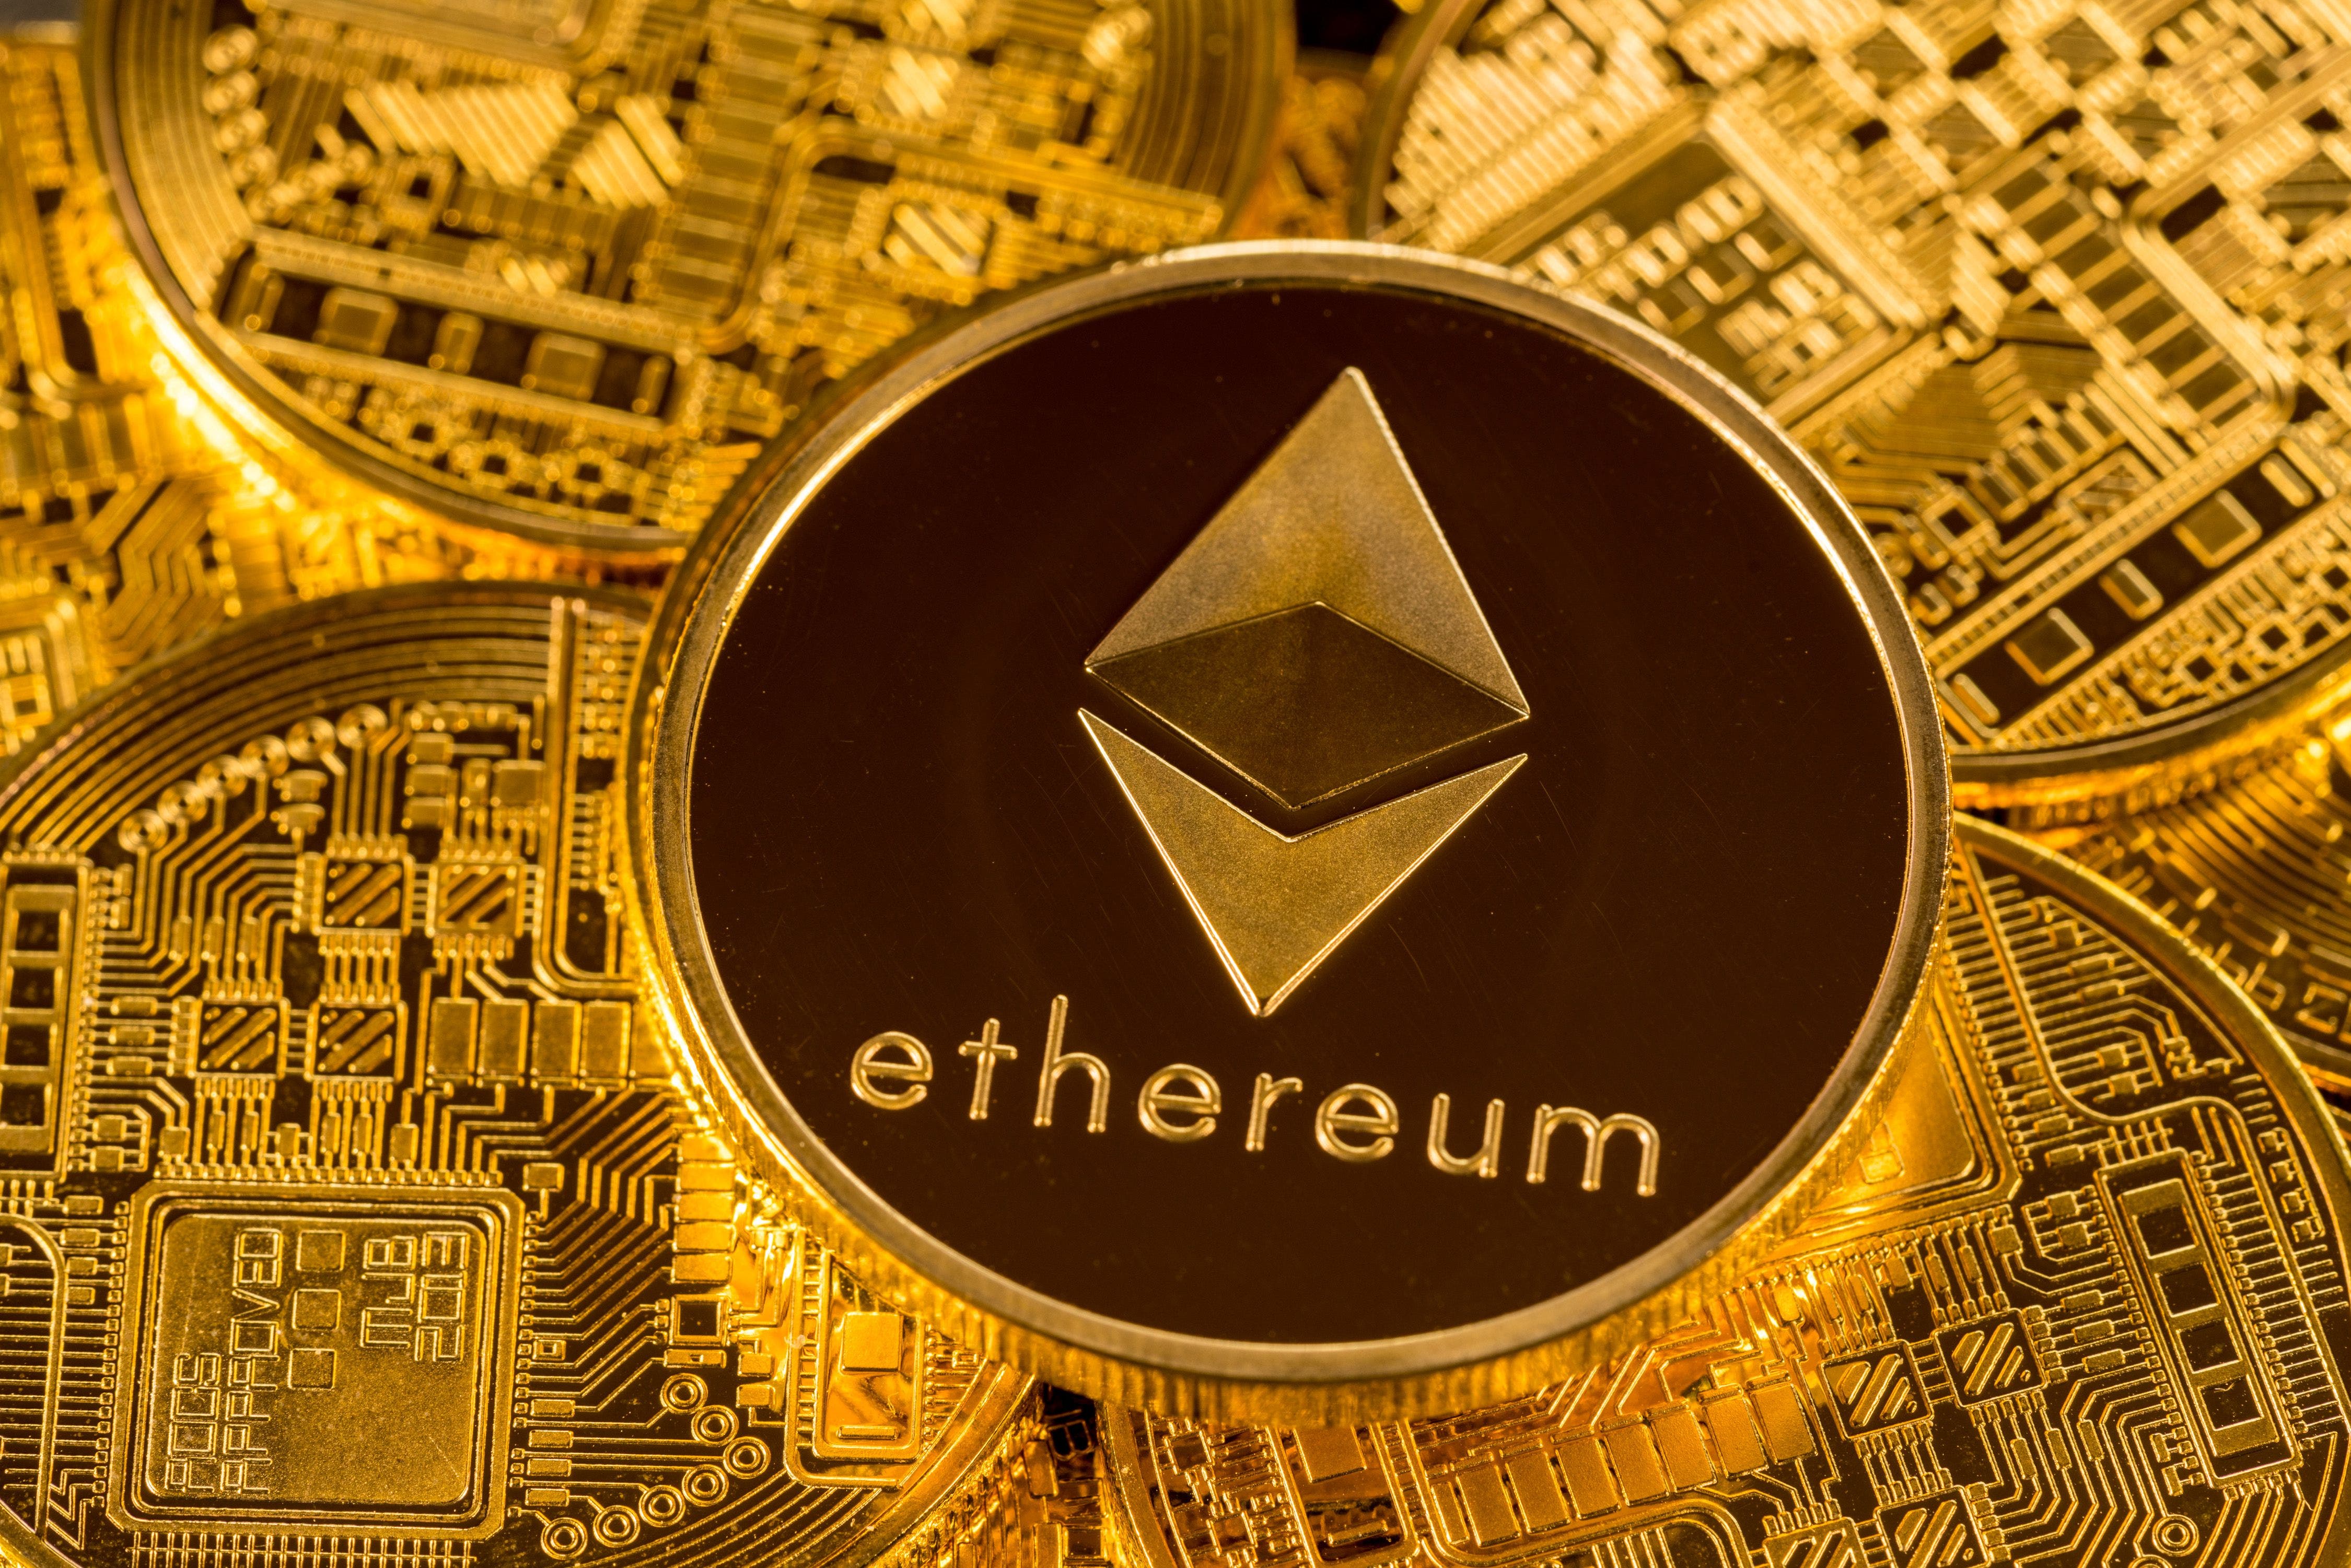 Ethereum Rises Above This Major Level Ahead Of The Merge; Here Are The Top Crypto Movers For Tuesday